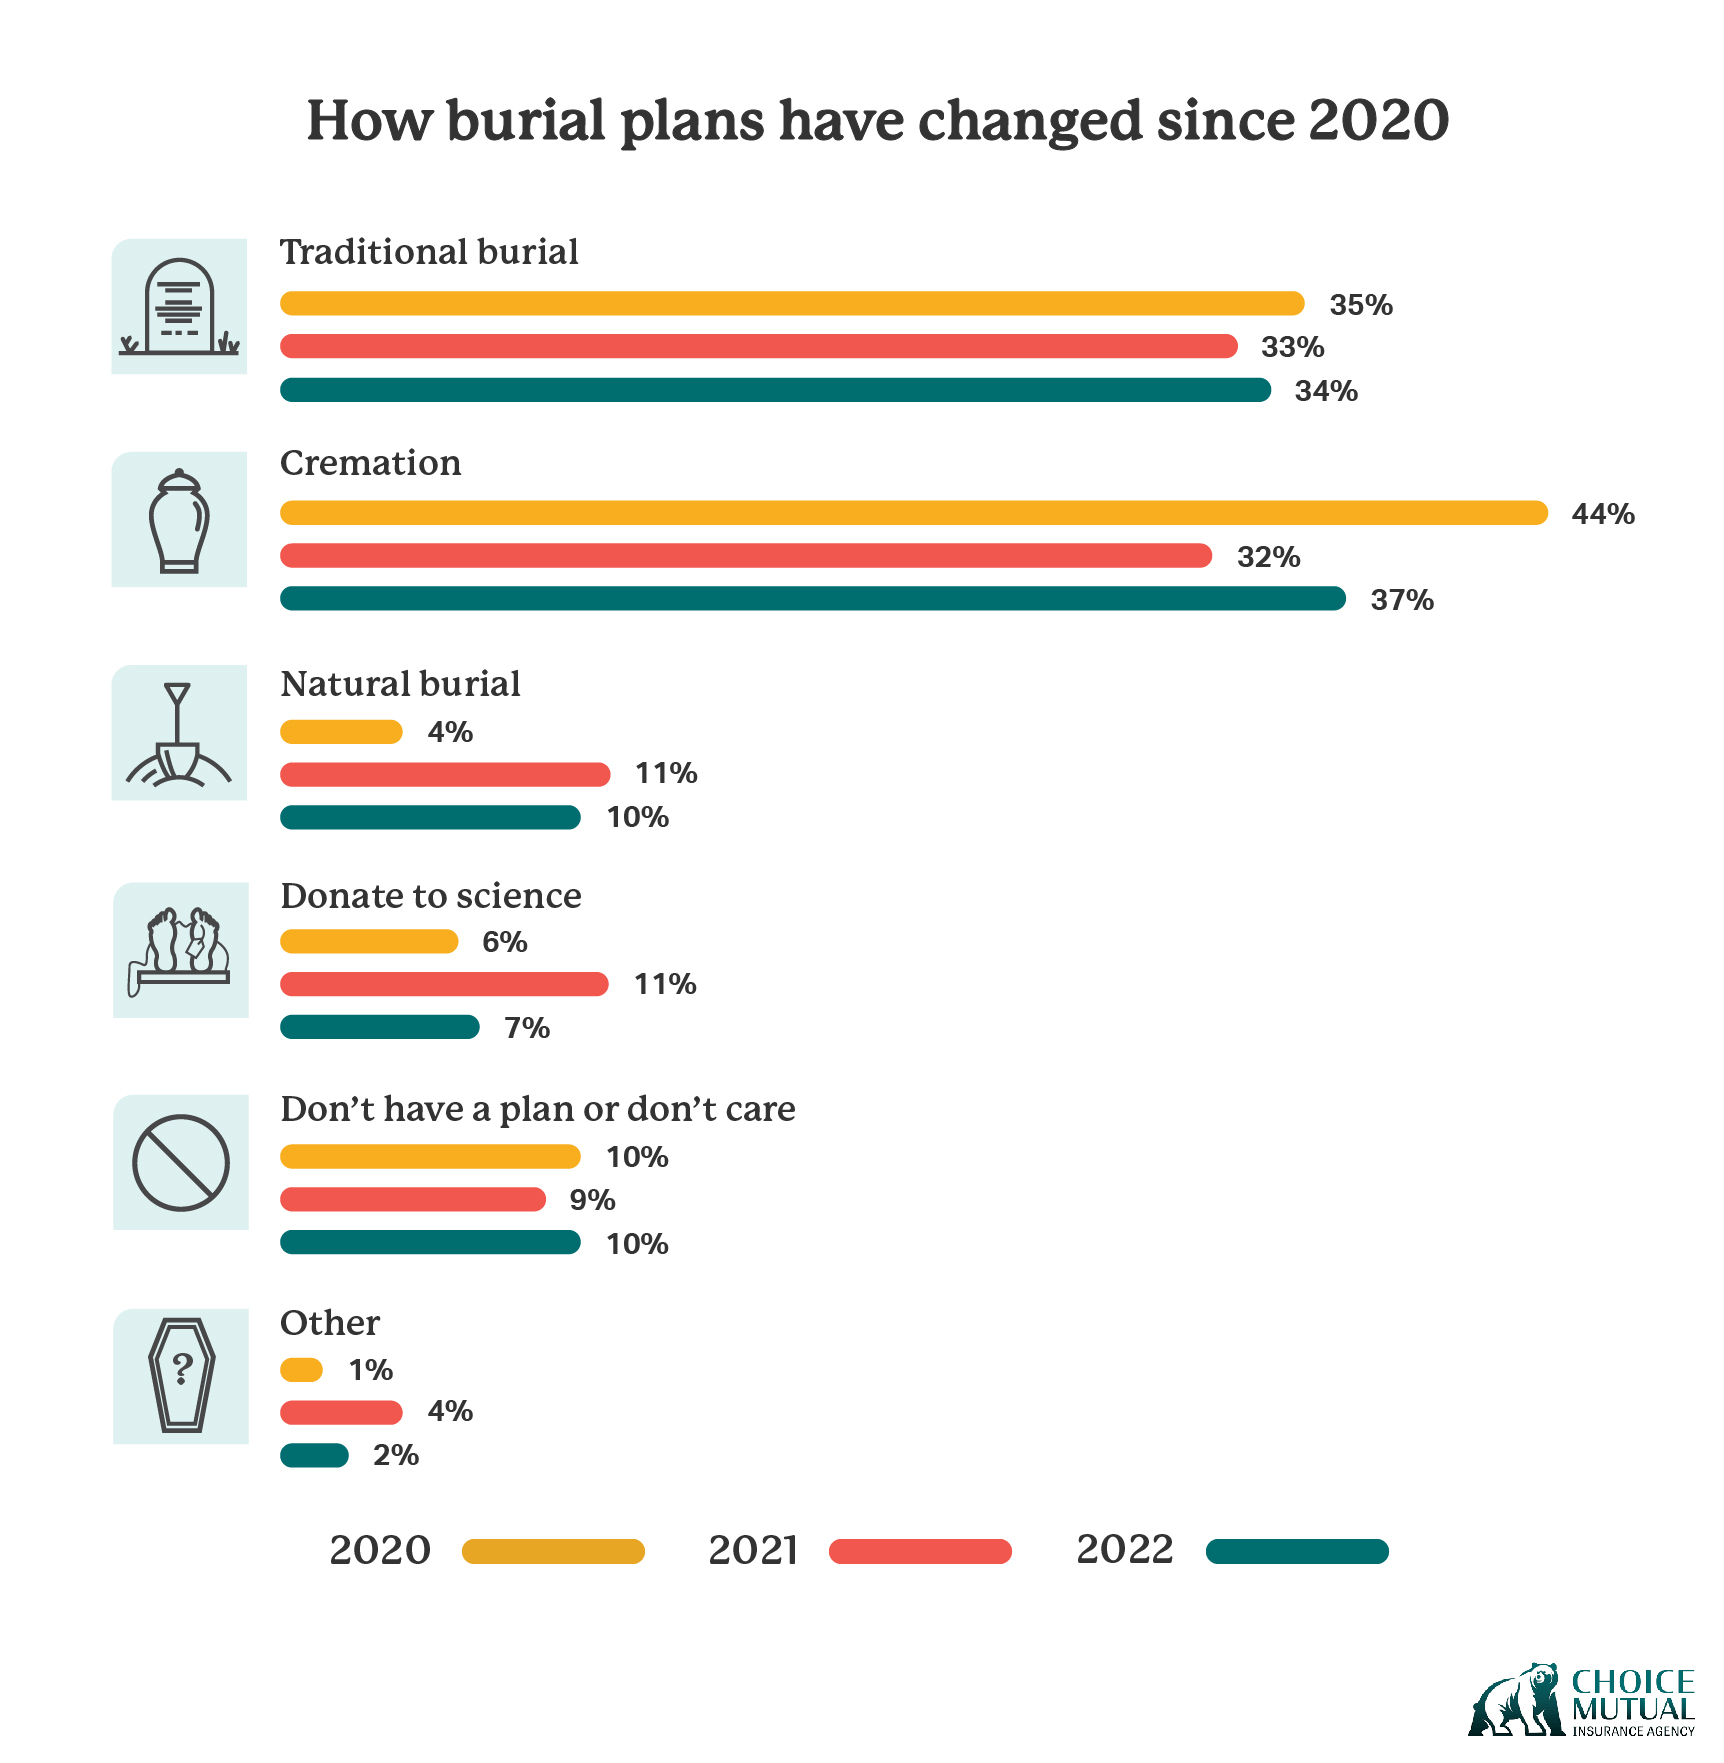 Graph showing how burial plans have changed since 2020